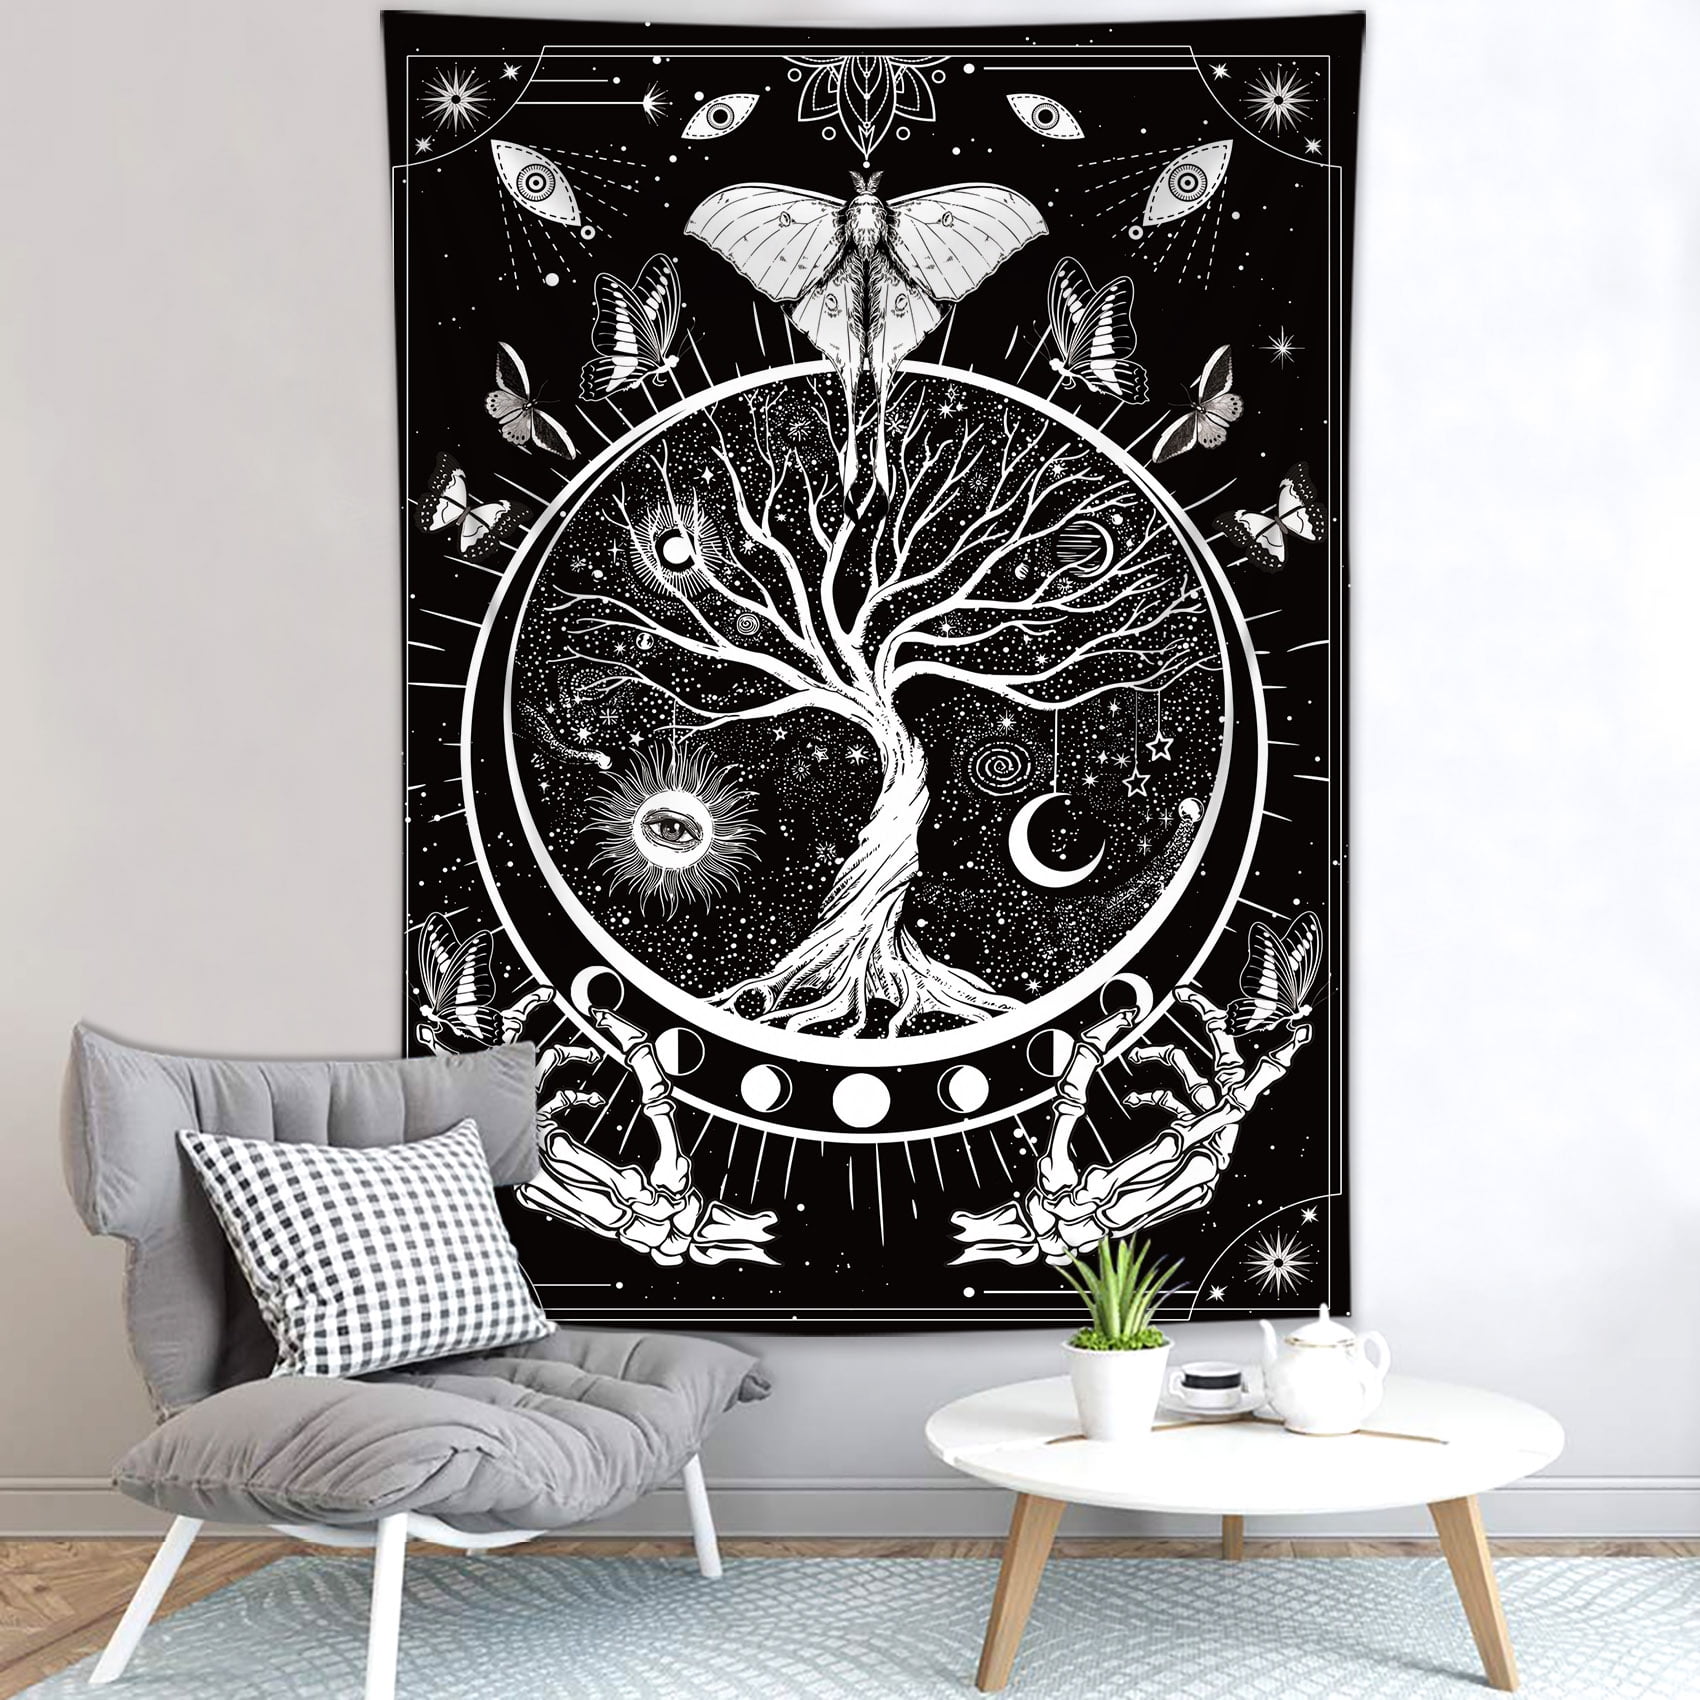 Moon, Sun, Stars, Astrology, Life Tree, Peach Skin Texture Tapestry Wall  Hanging Kit With Clips, Vintage Mystic Wall Decor Art For Home Bedroom,  Living Room, Dorm